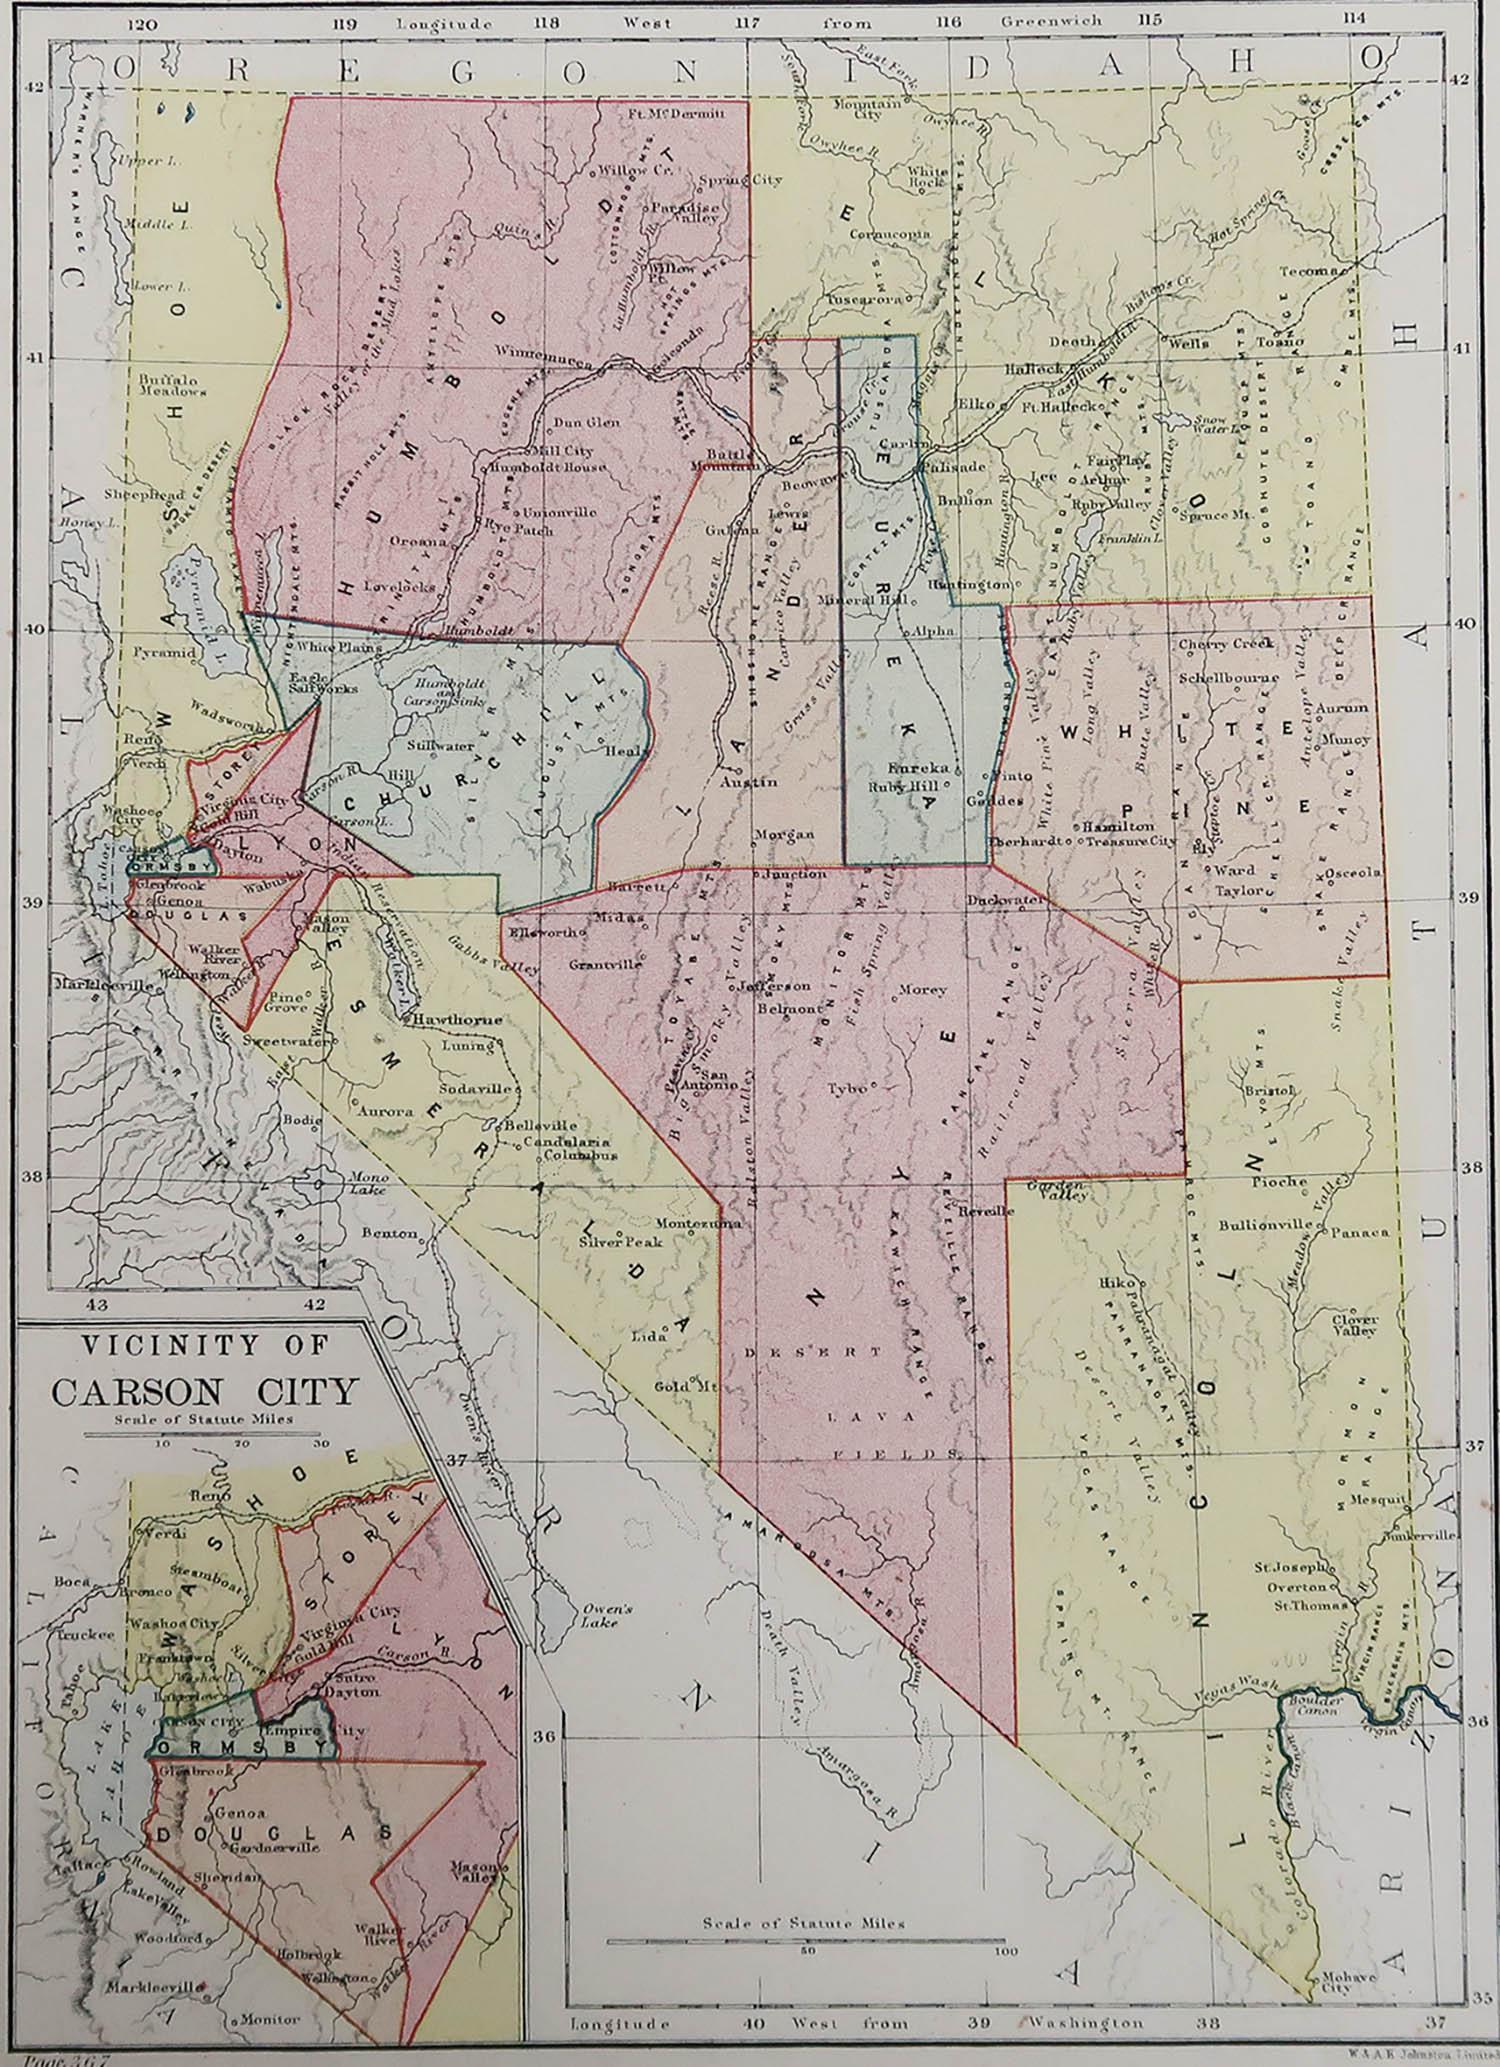 Great map of Nevada

Drawn and Engraved by W. & A.K. Johnston

Published By A & C Black, Edinburgh.

Original colour

Unframed.








